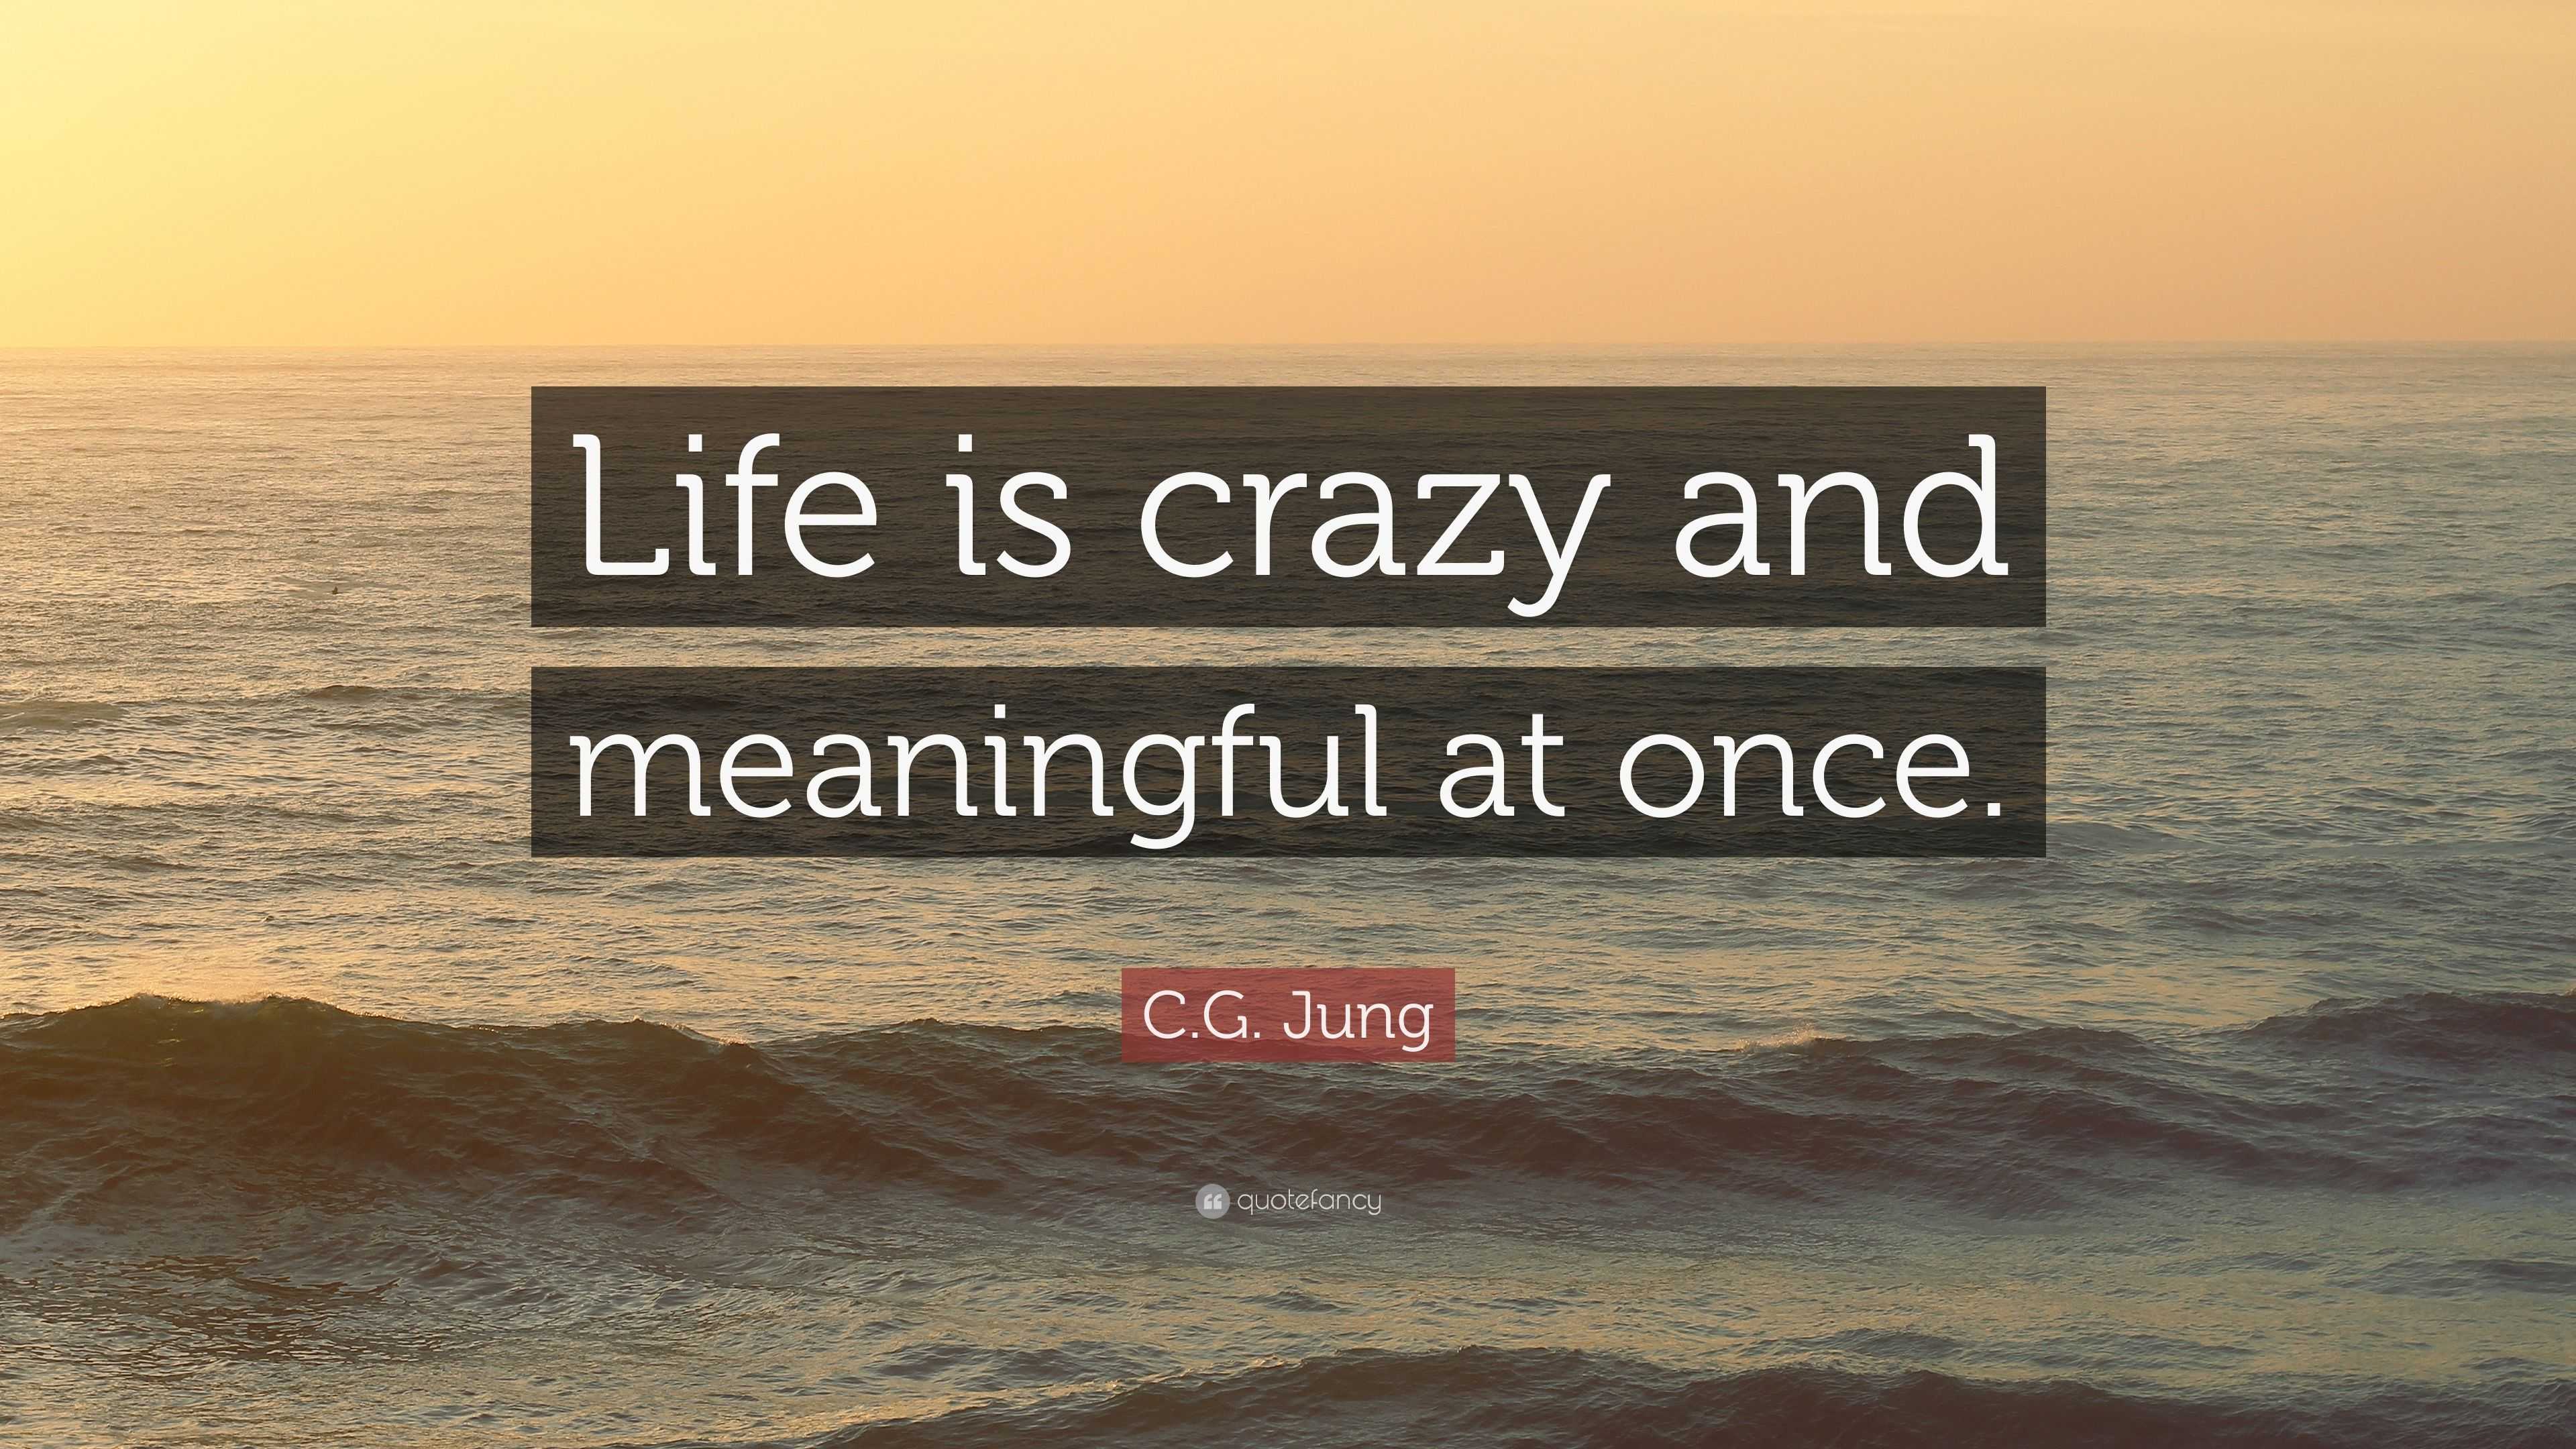 C G Jung Quote   Life  is crazy  and meaningful at once 